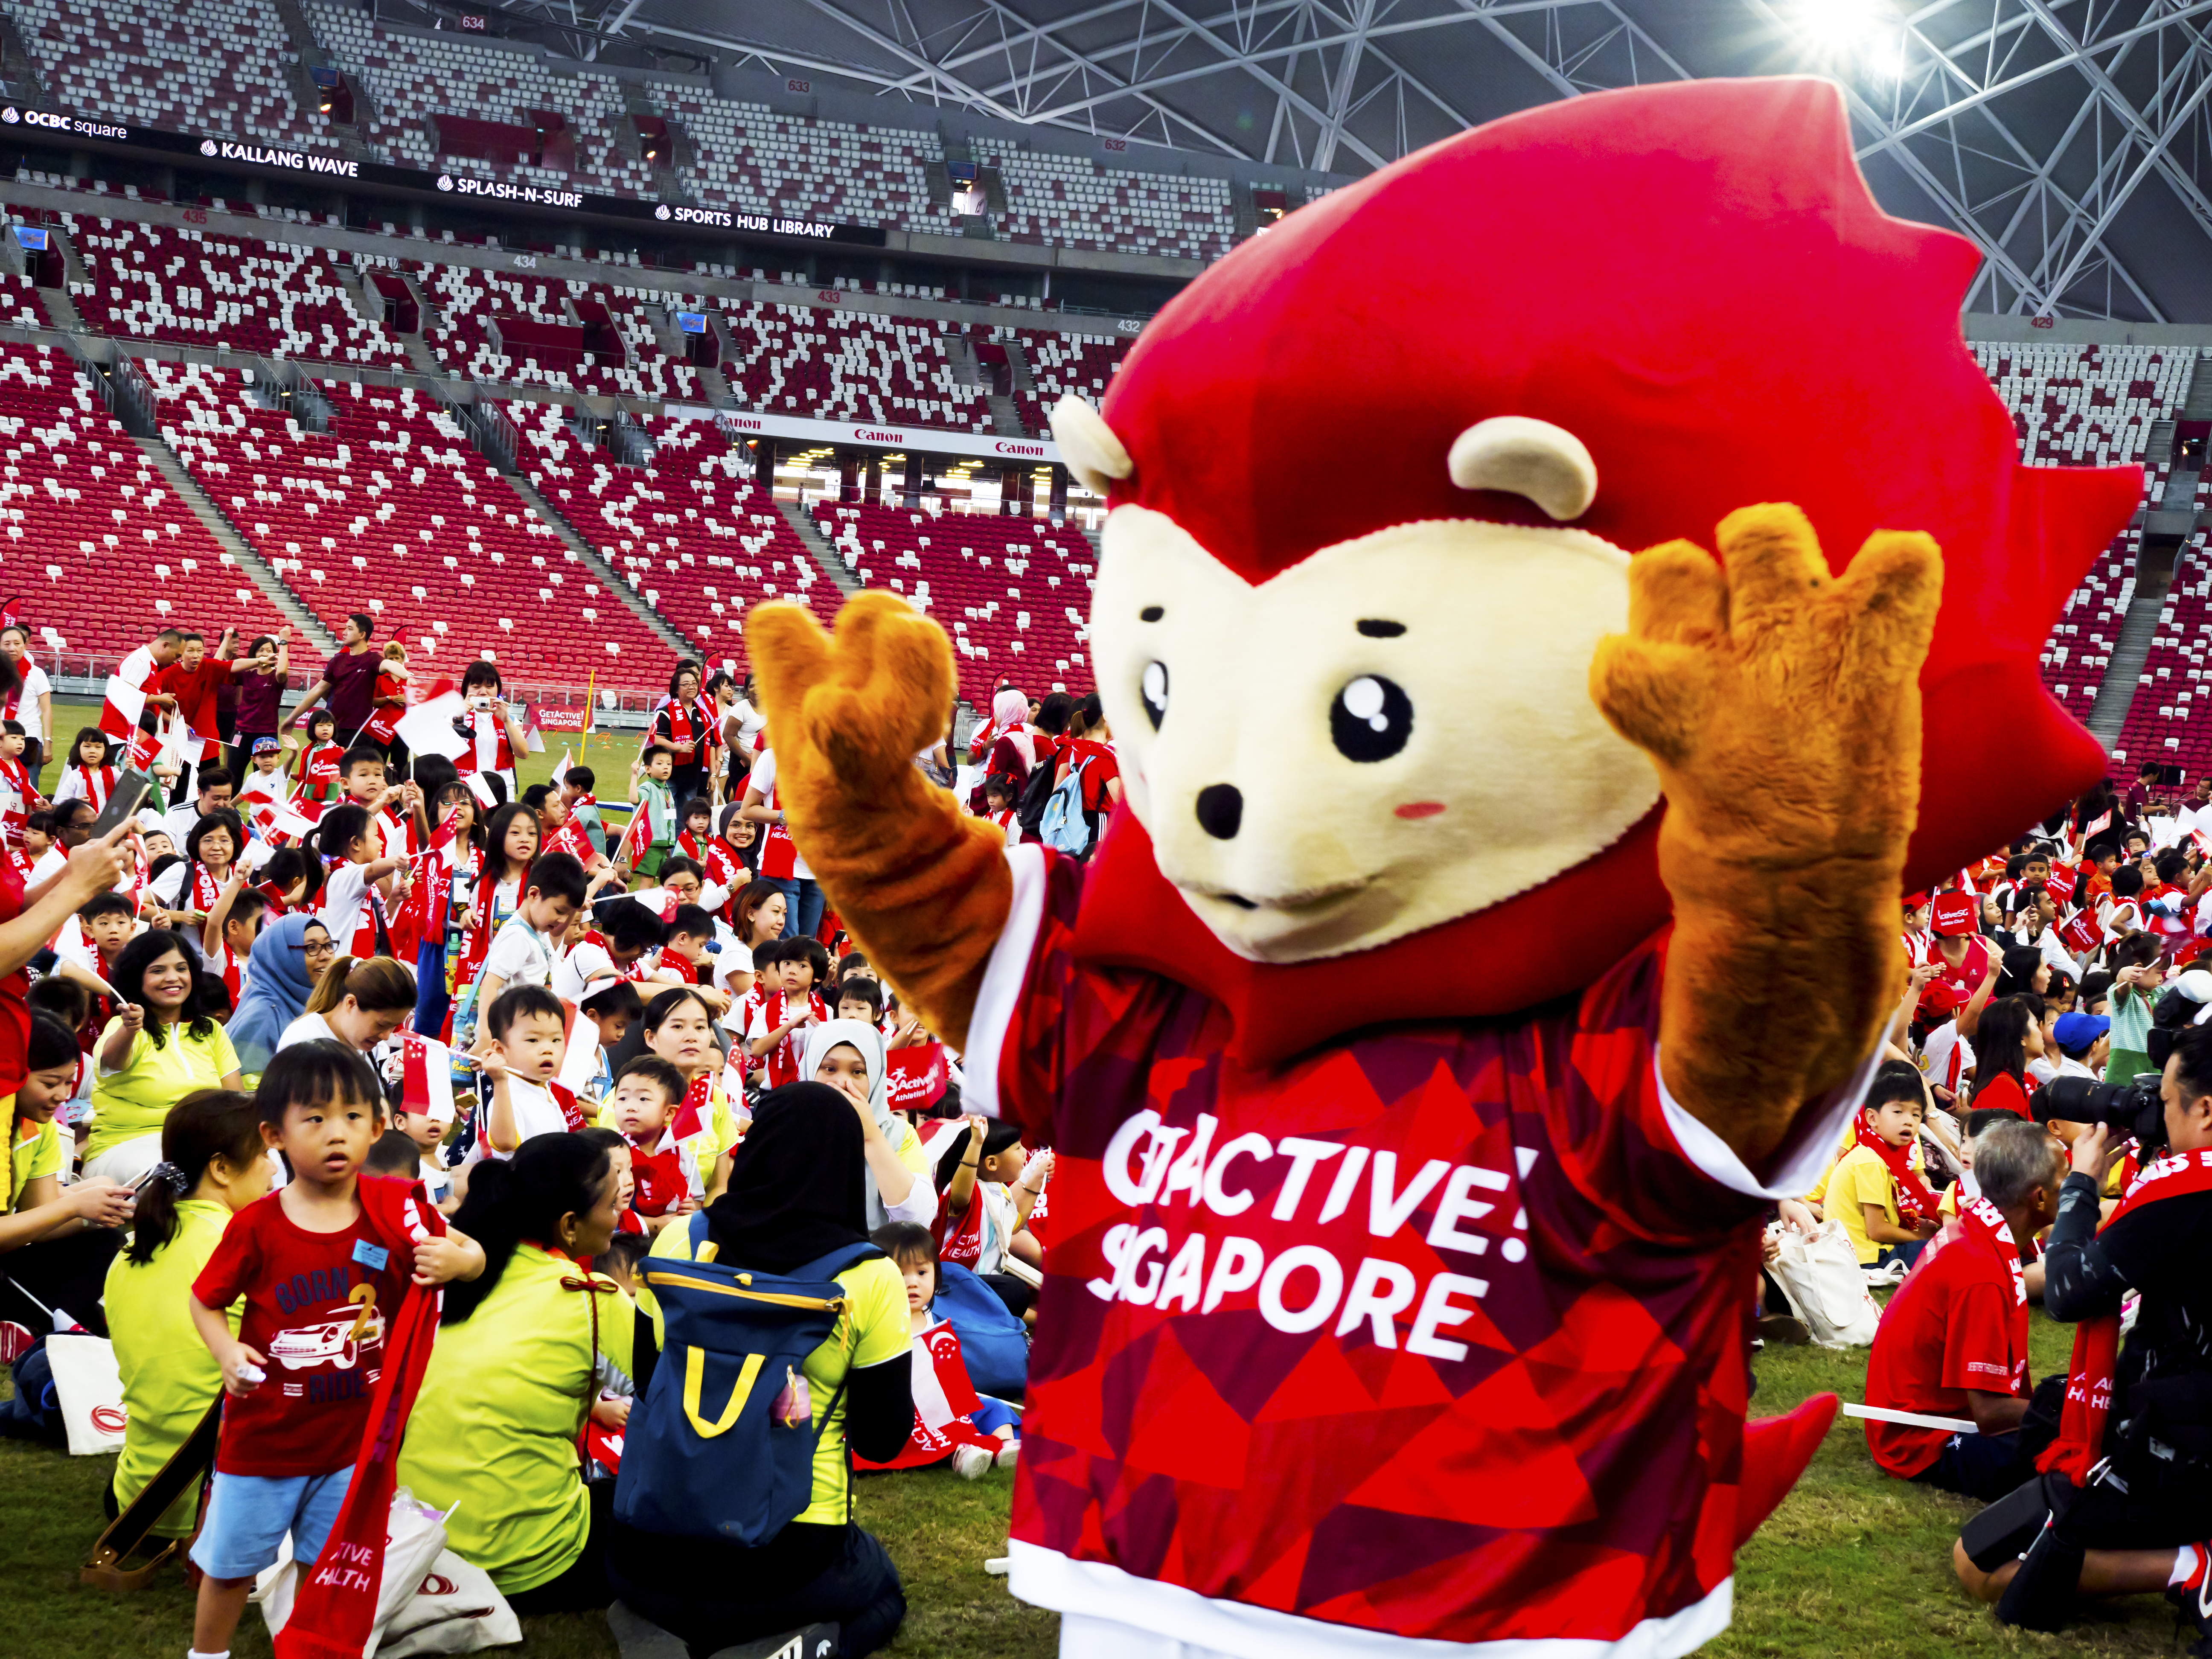 IT GETS PHYSICAL AT GETACTIVE! SINGAPORE 2022